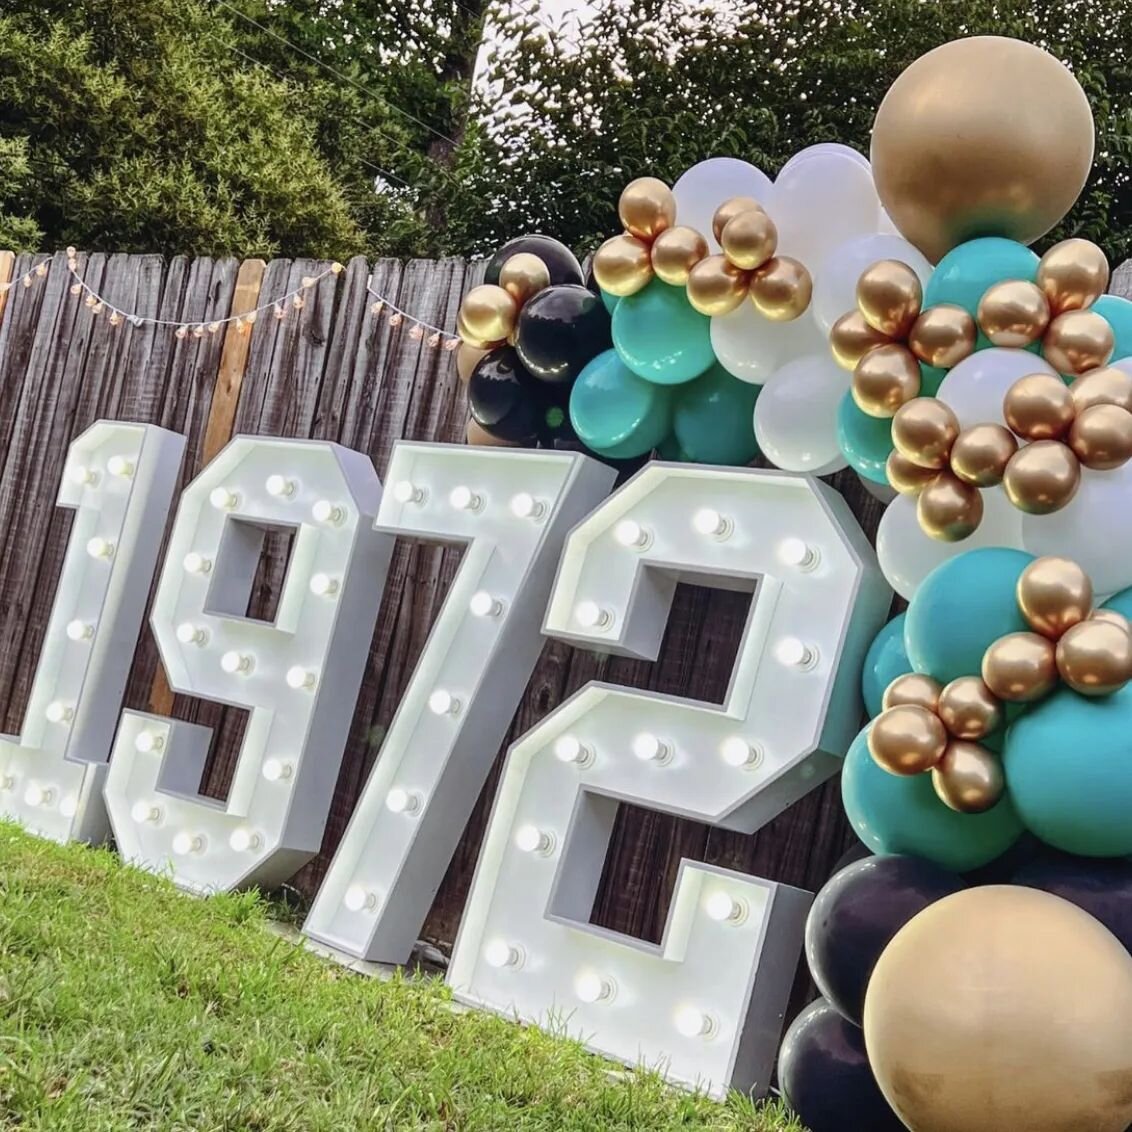 Fun fact! The famous game show The Price is Right debuted in 1972! That's like 50 years ago! Wow and they are still running 🥳🎉

#qclights #marqueeletters #marqueeletterlights #charlotteevents #priceisright #ncevents